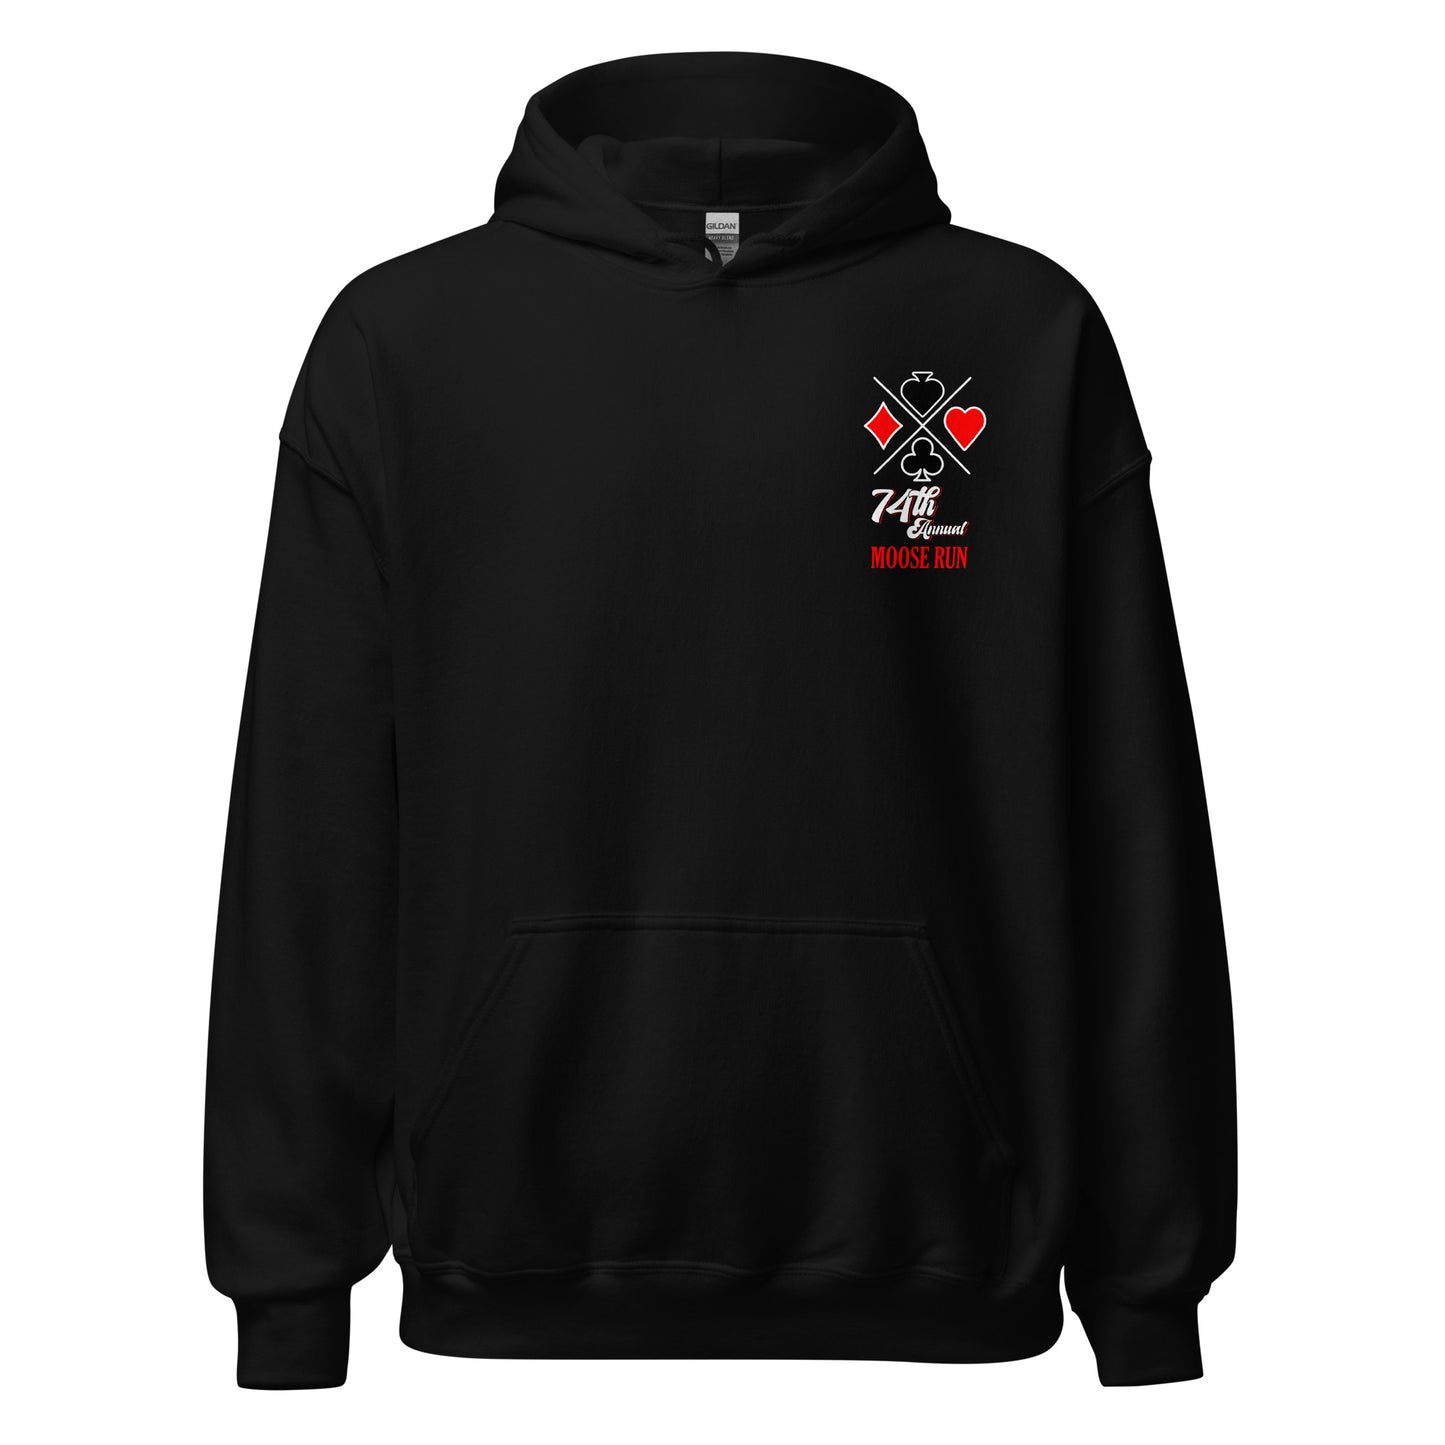 Official Four Aces 74th Moose Run Event Hoodie